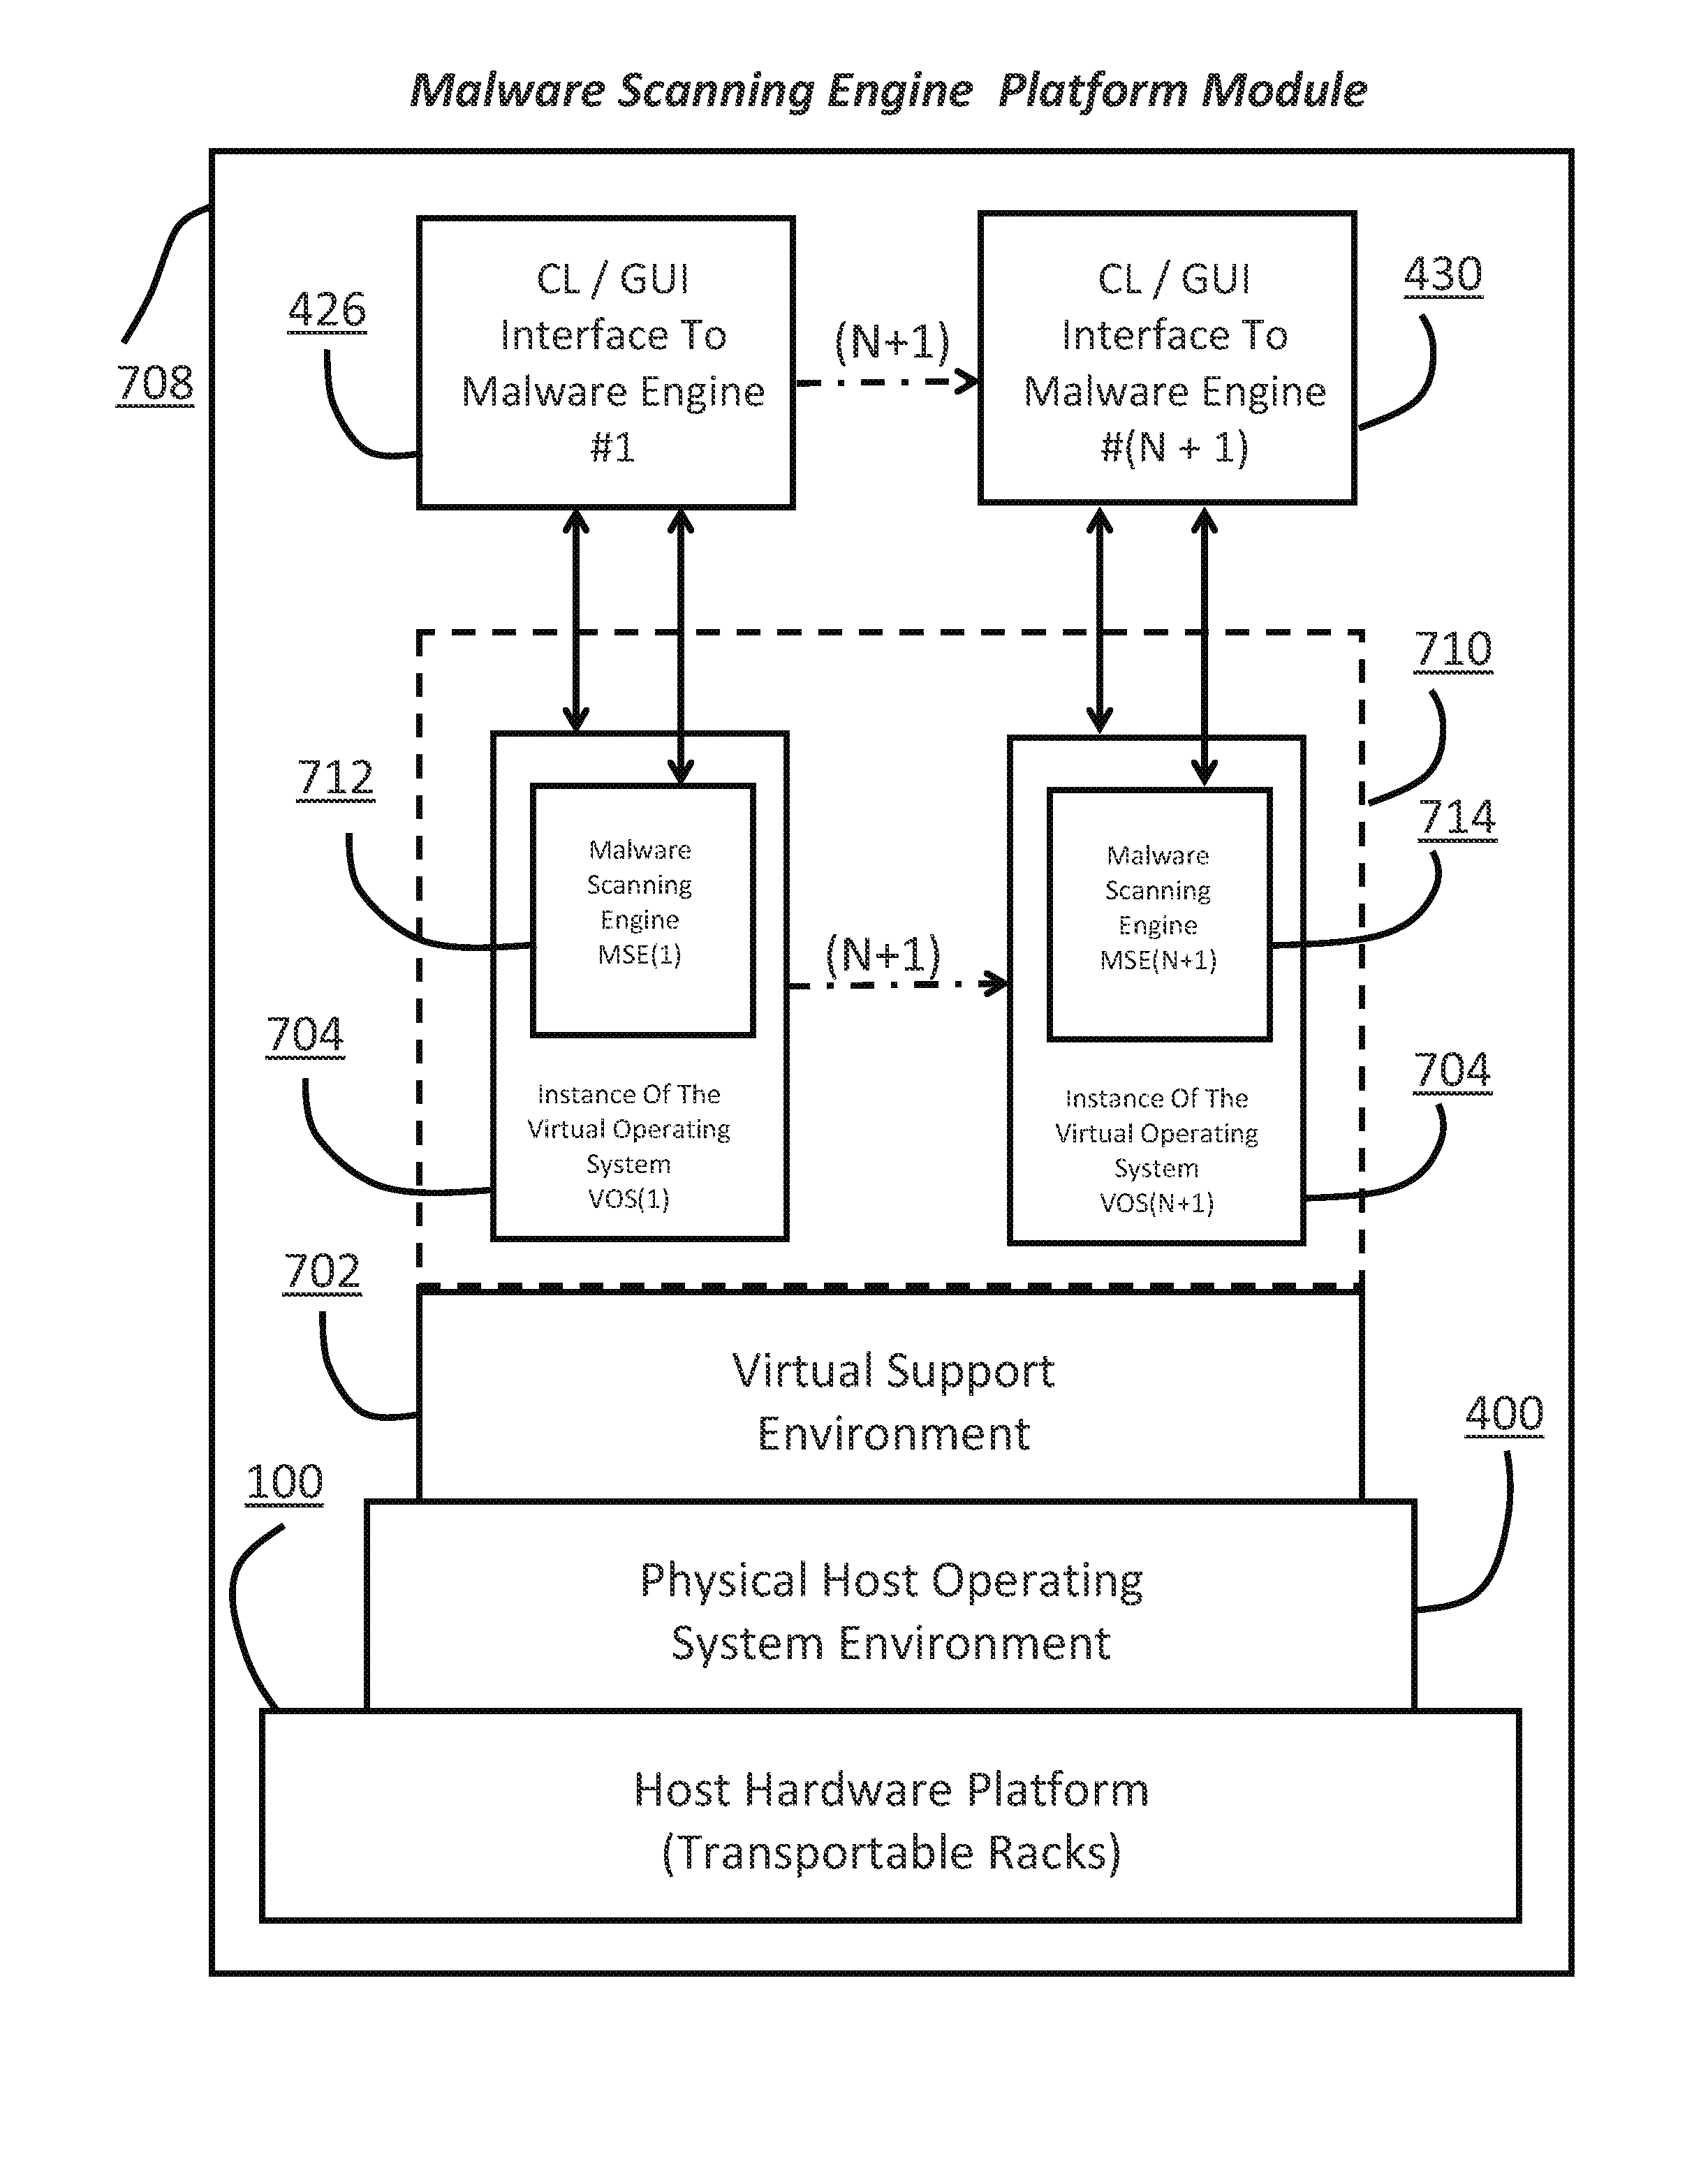 Method to scan a forensic image of a computer system with multiple malicious code detection engines simultaneously from a master control point